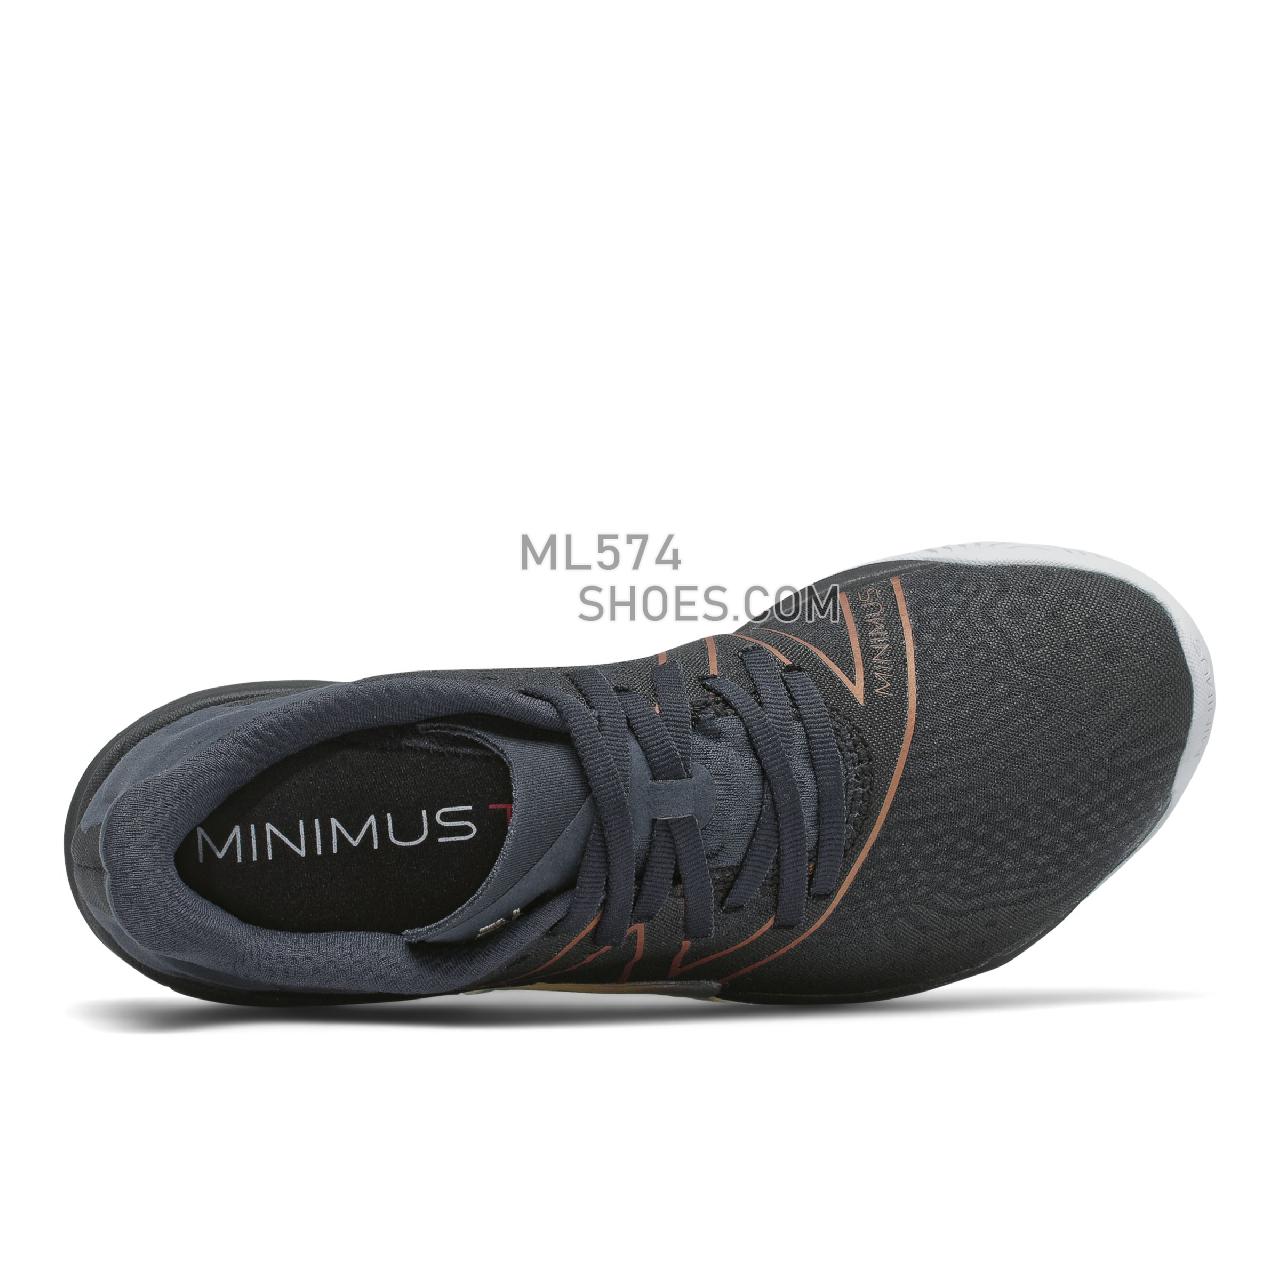 New Balance Minimus TR - Women's Workout - Black with Outerspace and Copper Metallic - WXMTRLK1